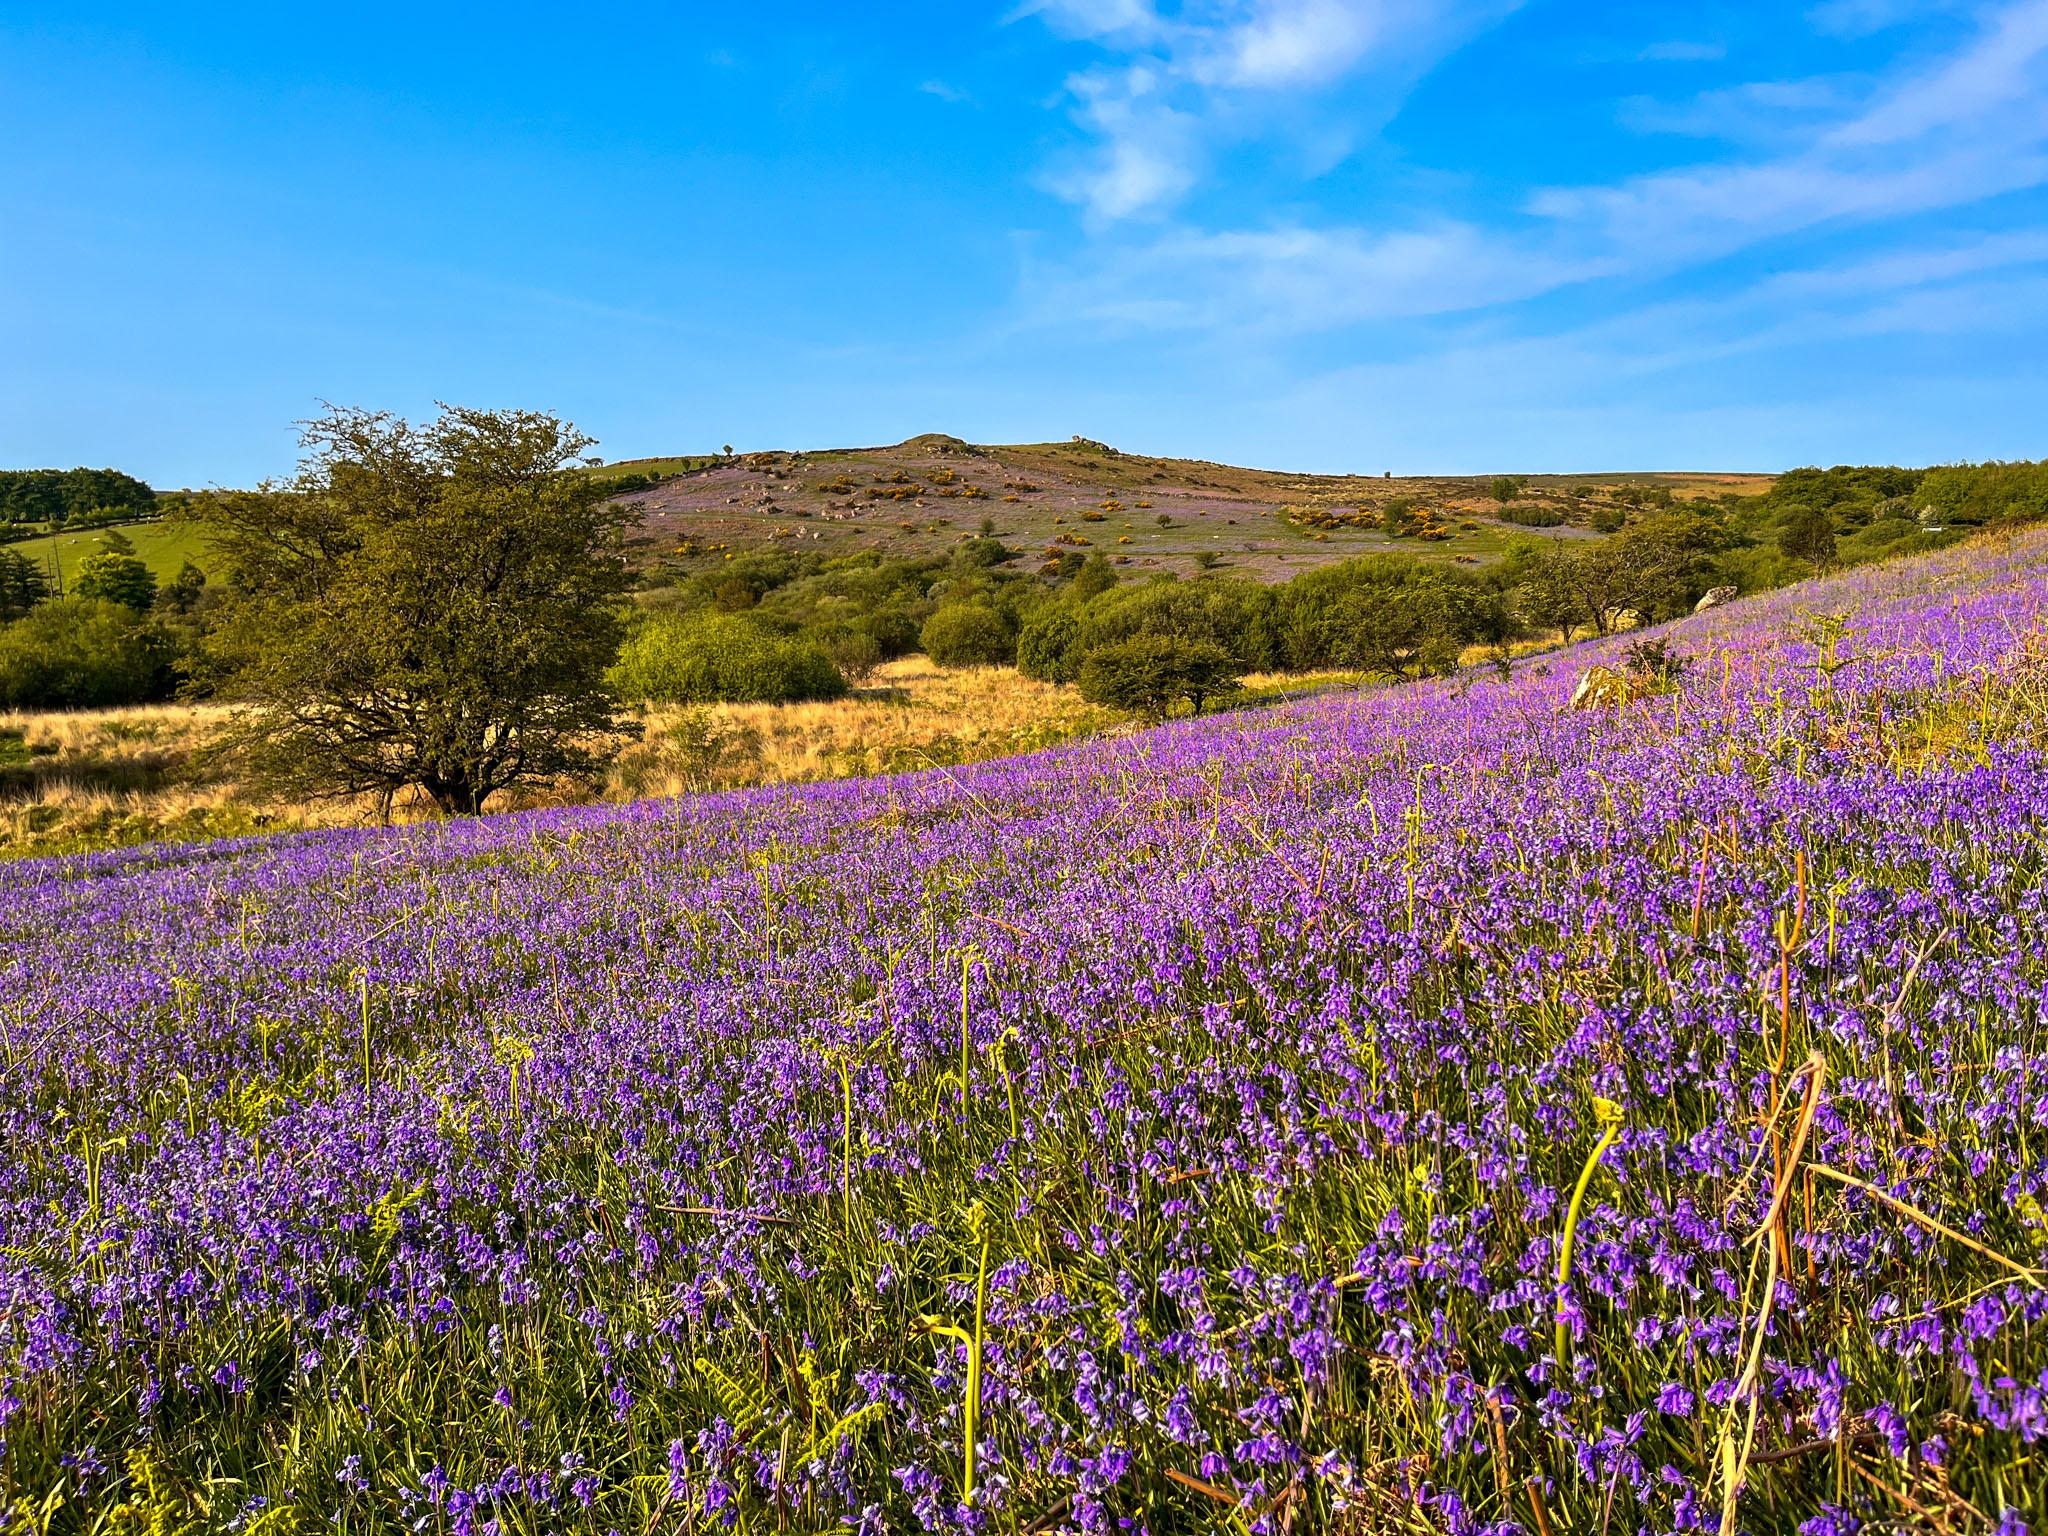 Things to do in Devon featured image of bluebells in Dartmoor.